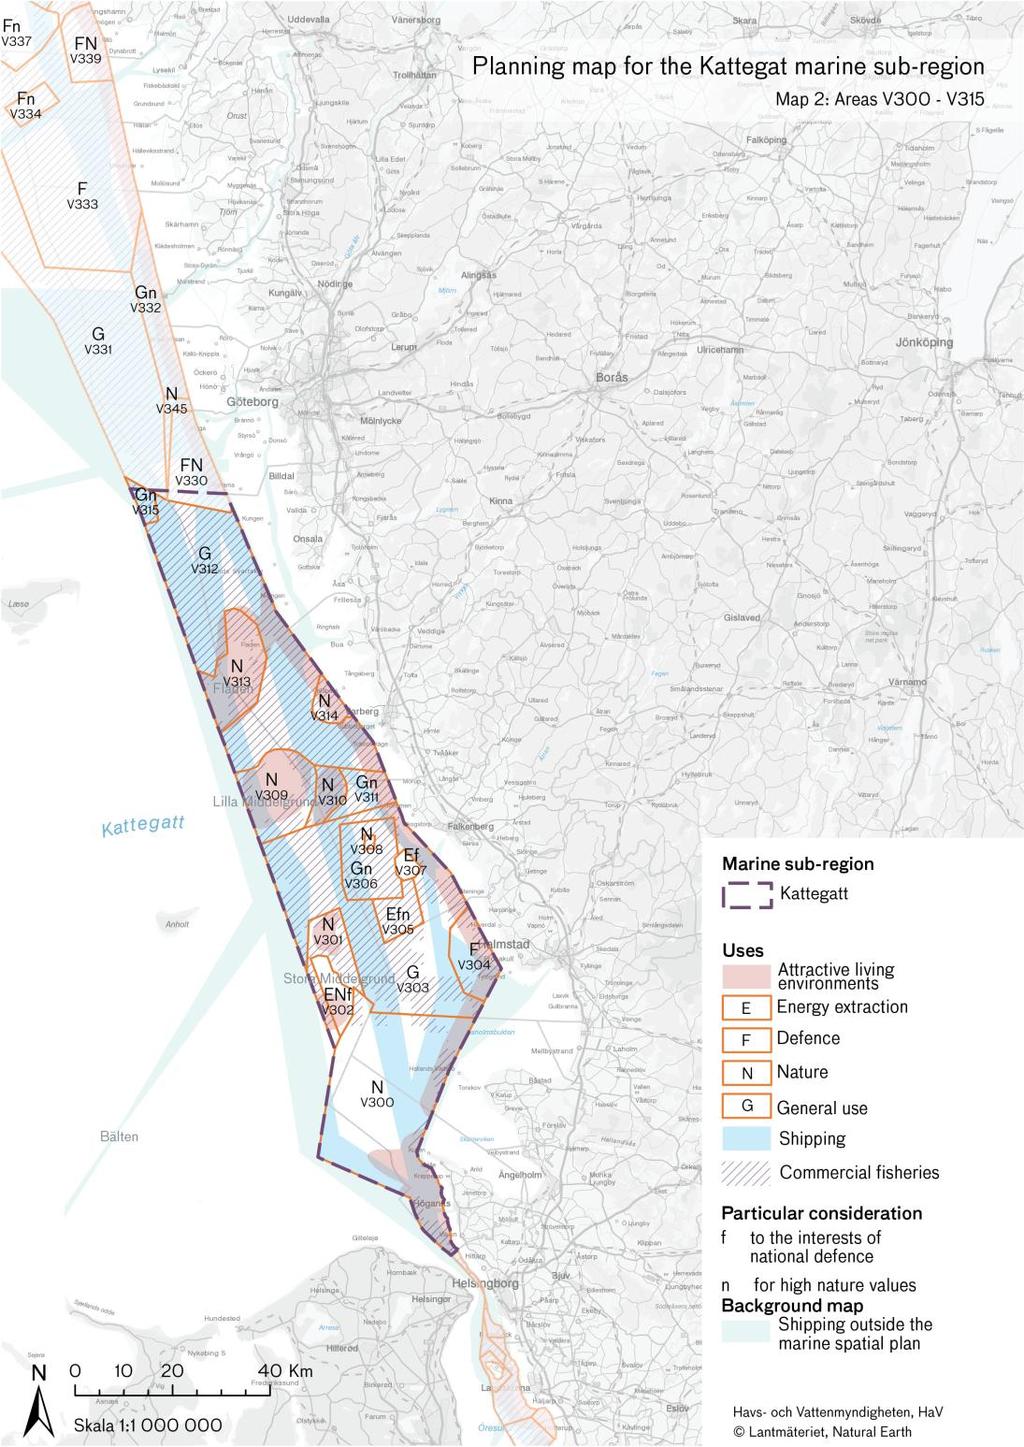 Swedish Agency for Marine and Water Management 2018 Figure 7 Planning map for the Kattegat marine sub-region.